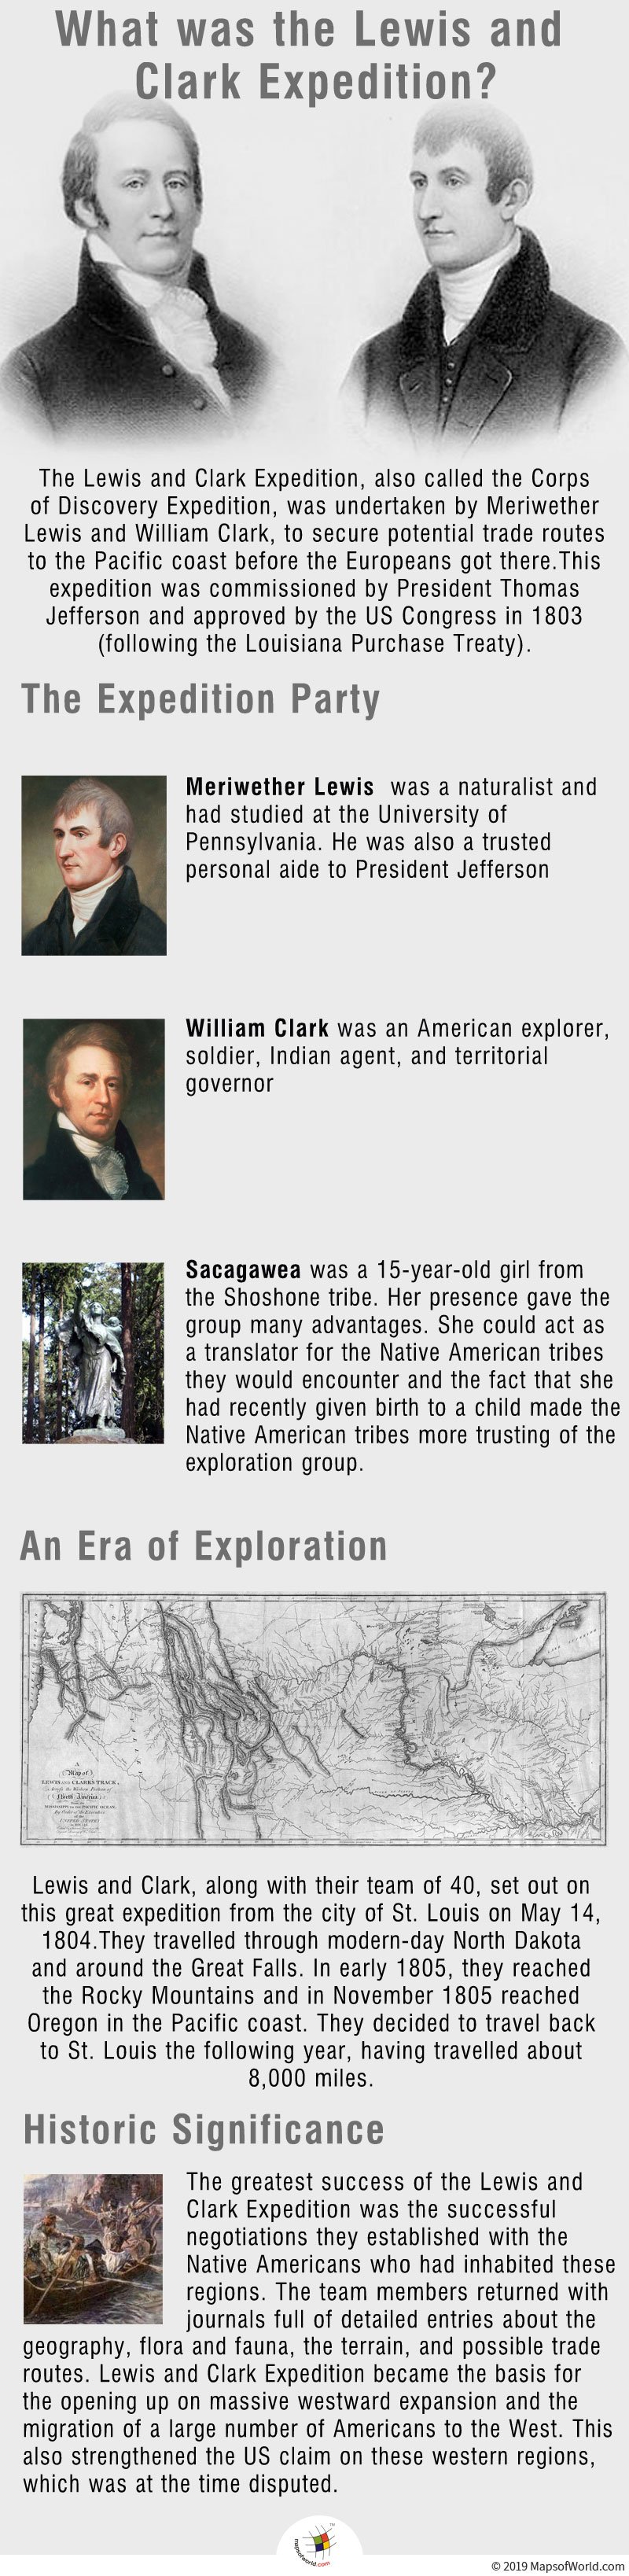 significance of lewis and clark expedition